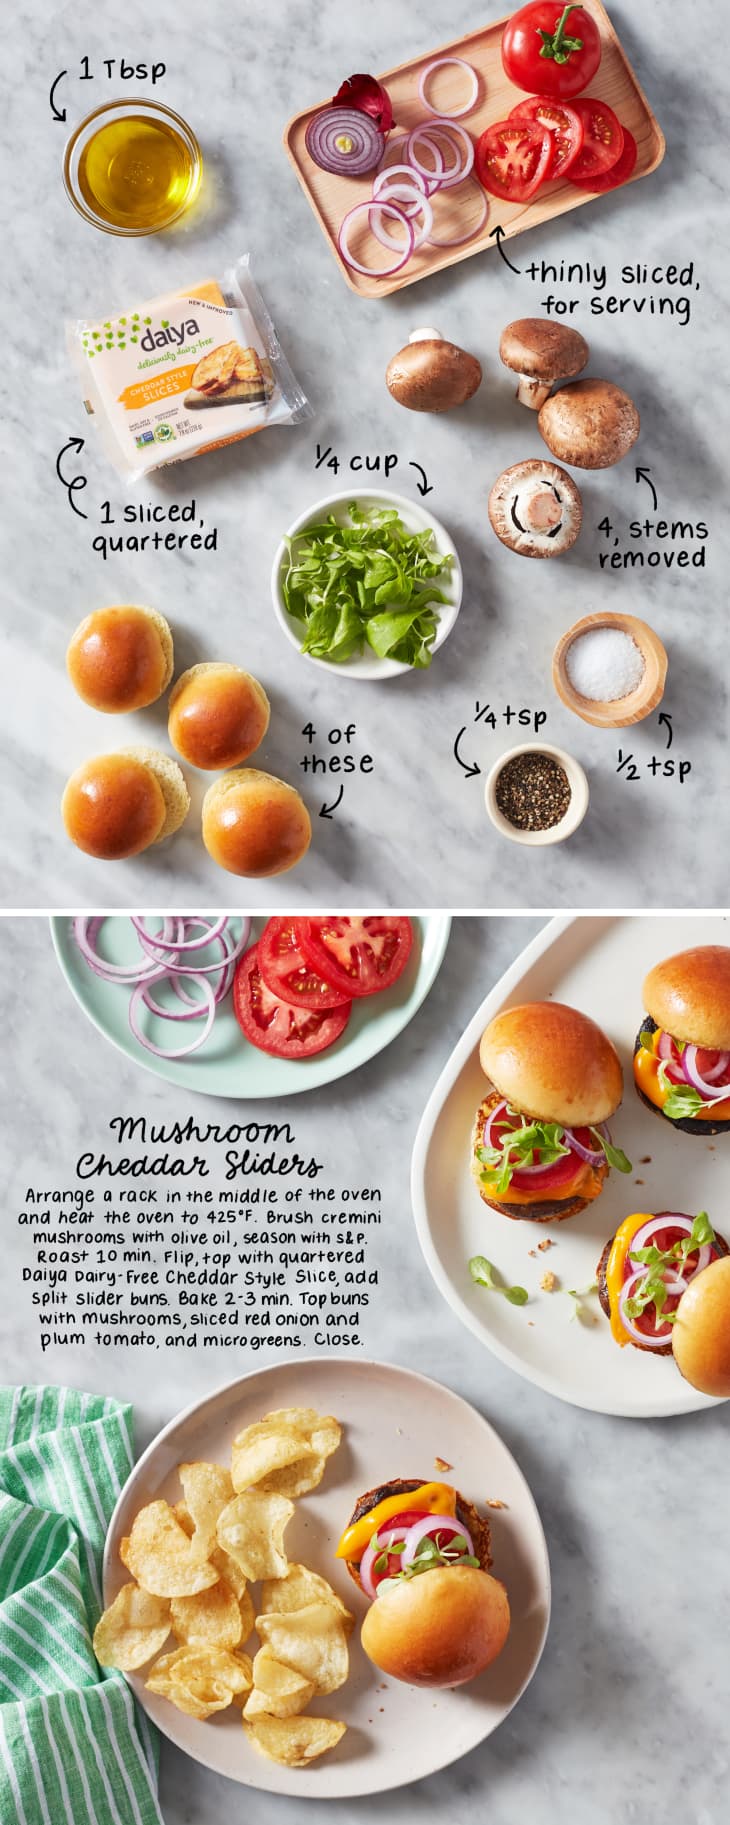 Mushroom Cheddar Sliders and all the ingredients to make